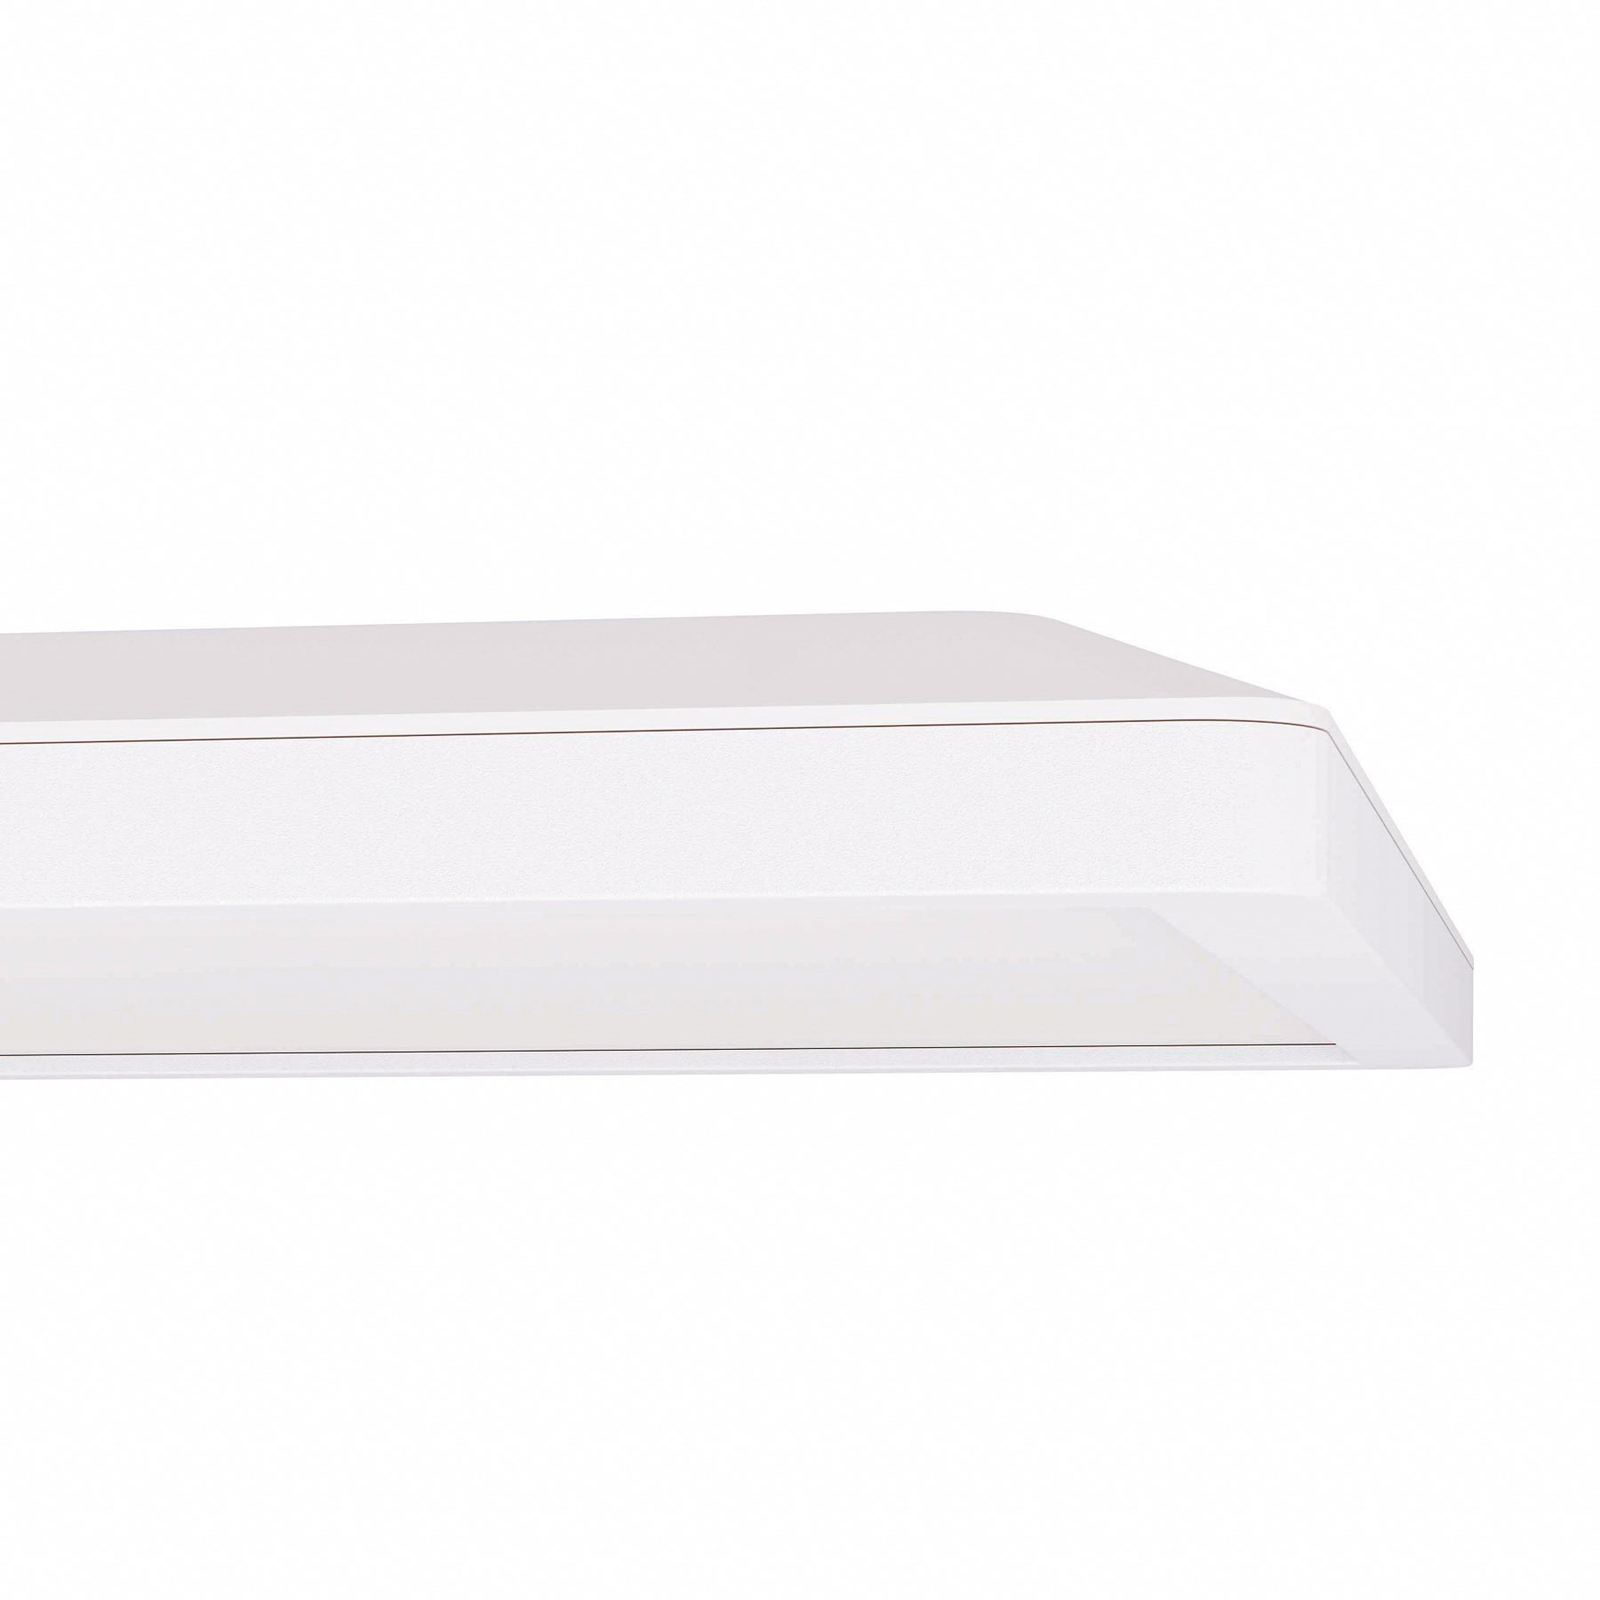 EGLO connect Rovito-Z ceiling lamp wh, 29 x 29 cm